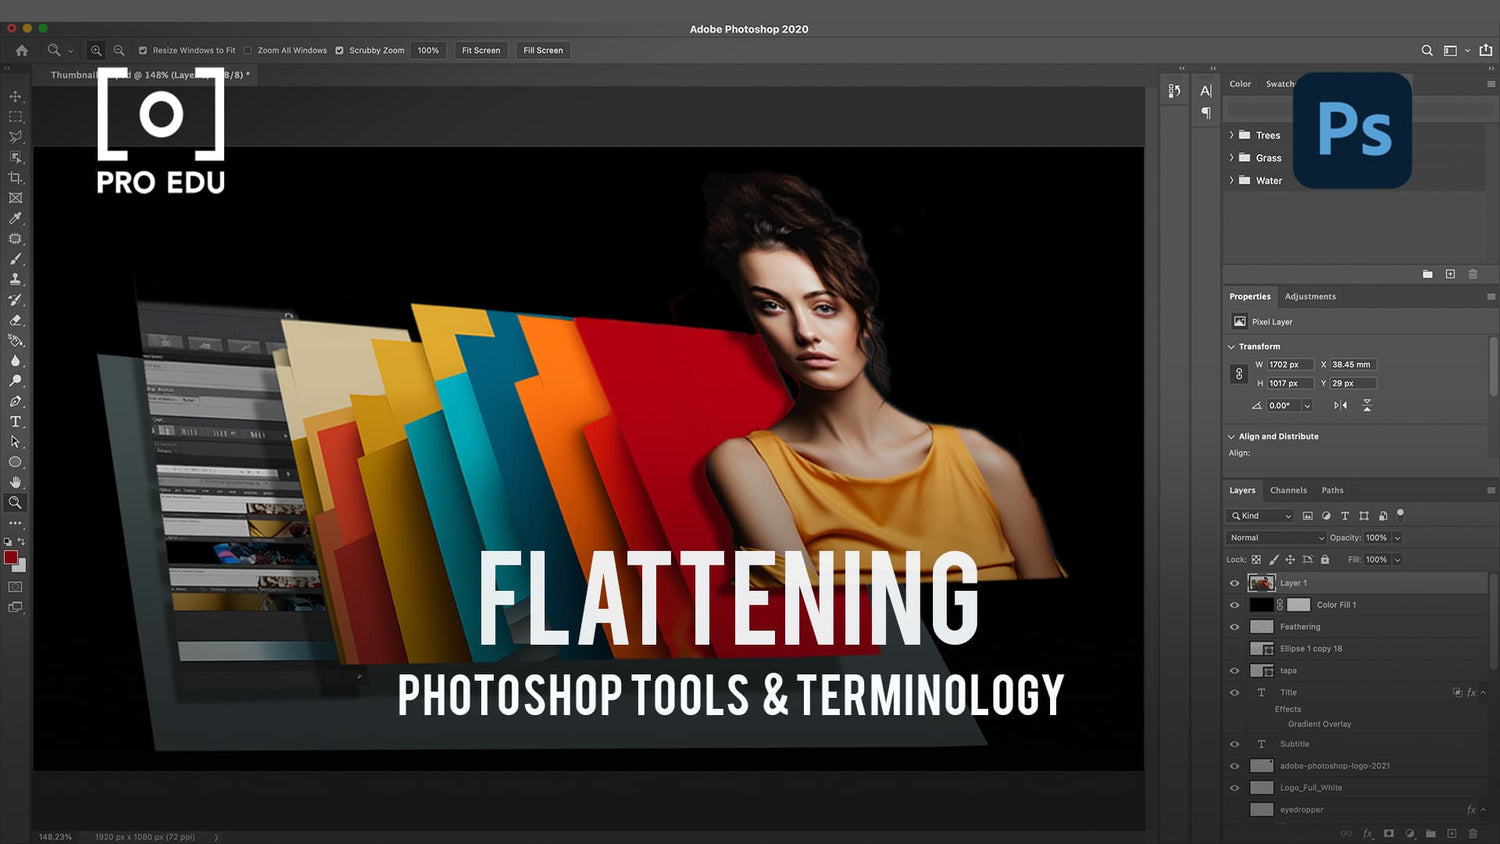 Flattening Images in Photoshop - PRO EDU Guide